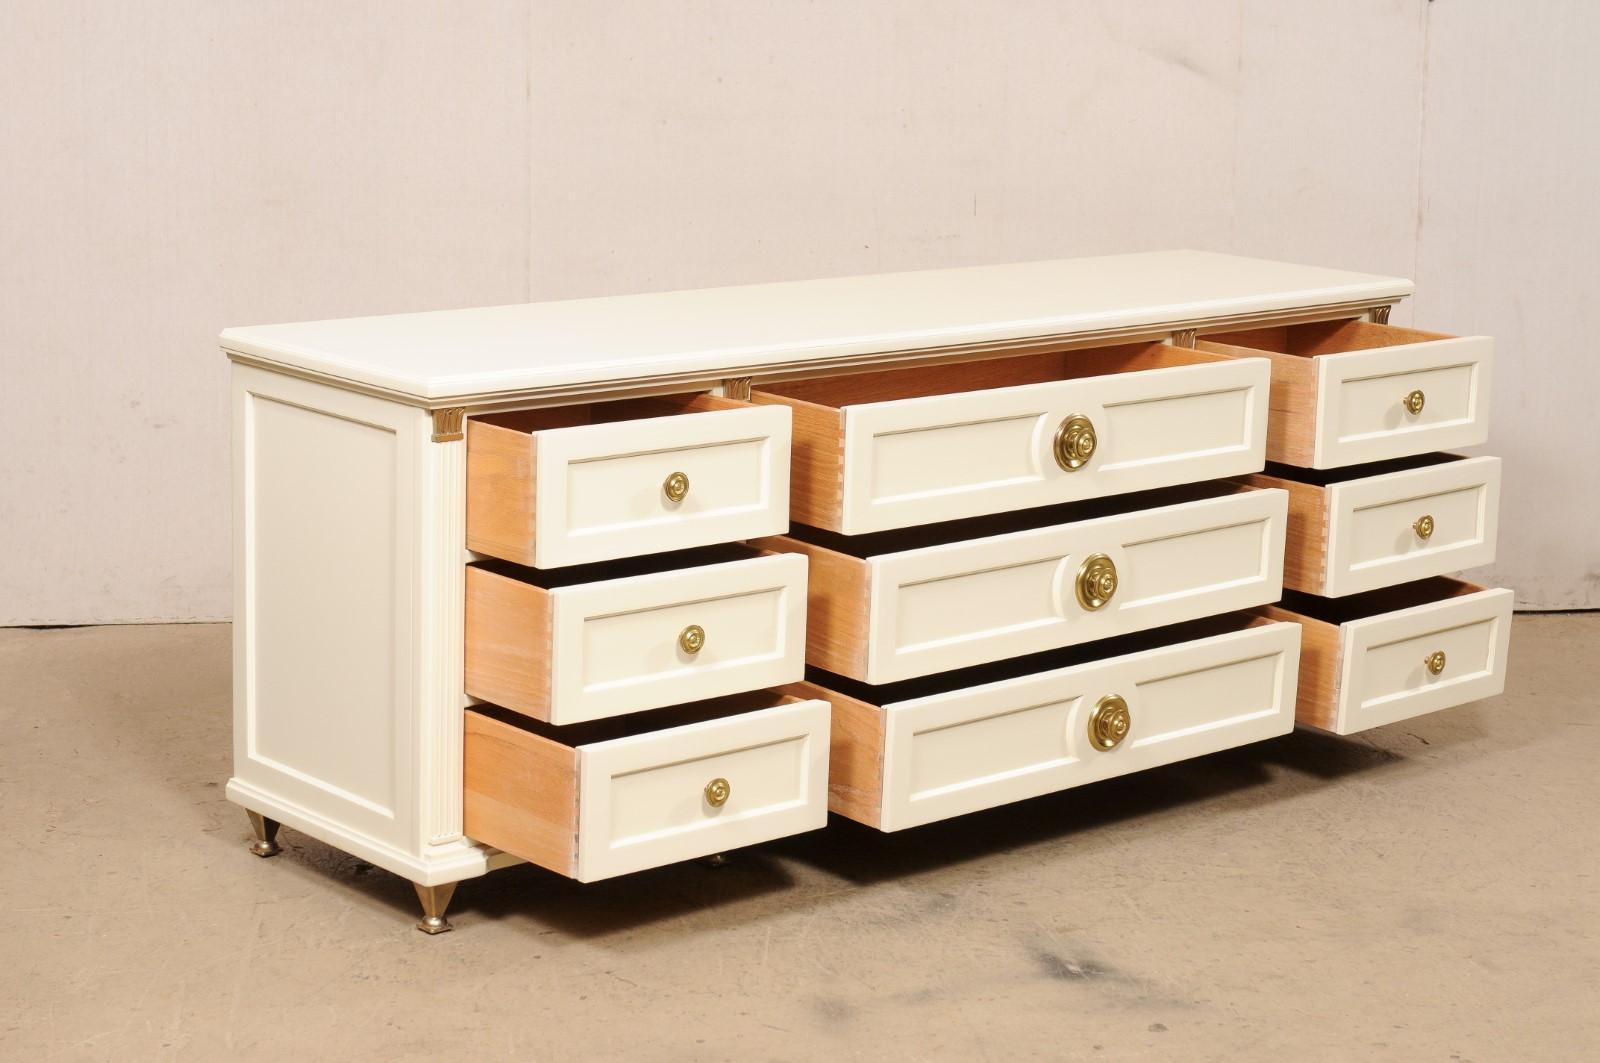 20th Century Martinsville 7 Ft Long Chest of Drawers, Ivory with Gold Hardware & Accents